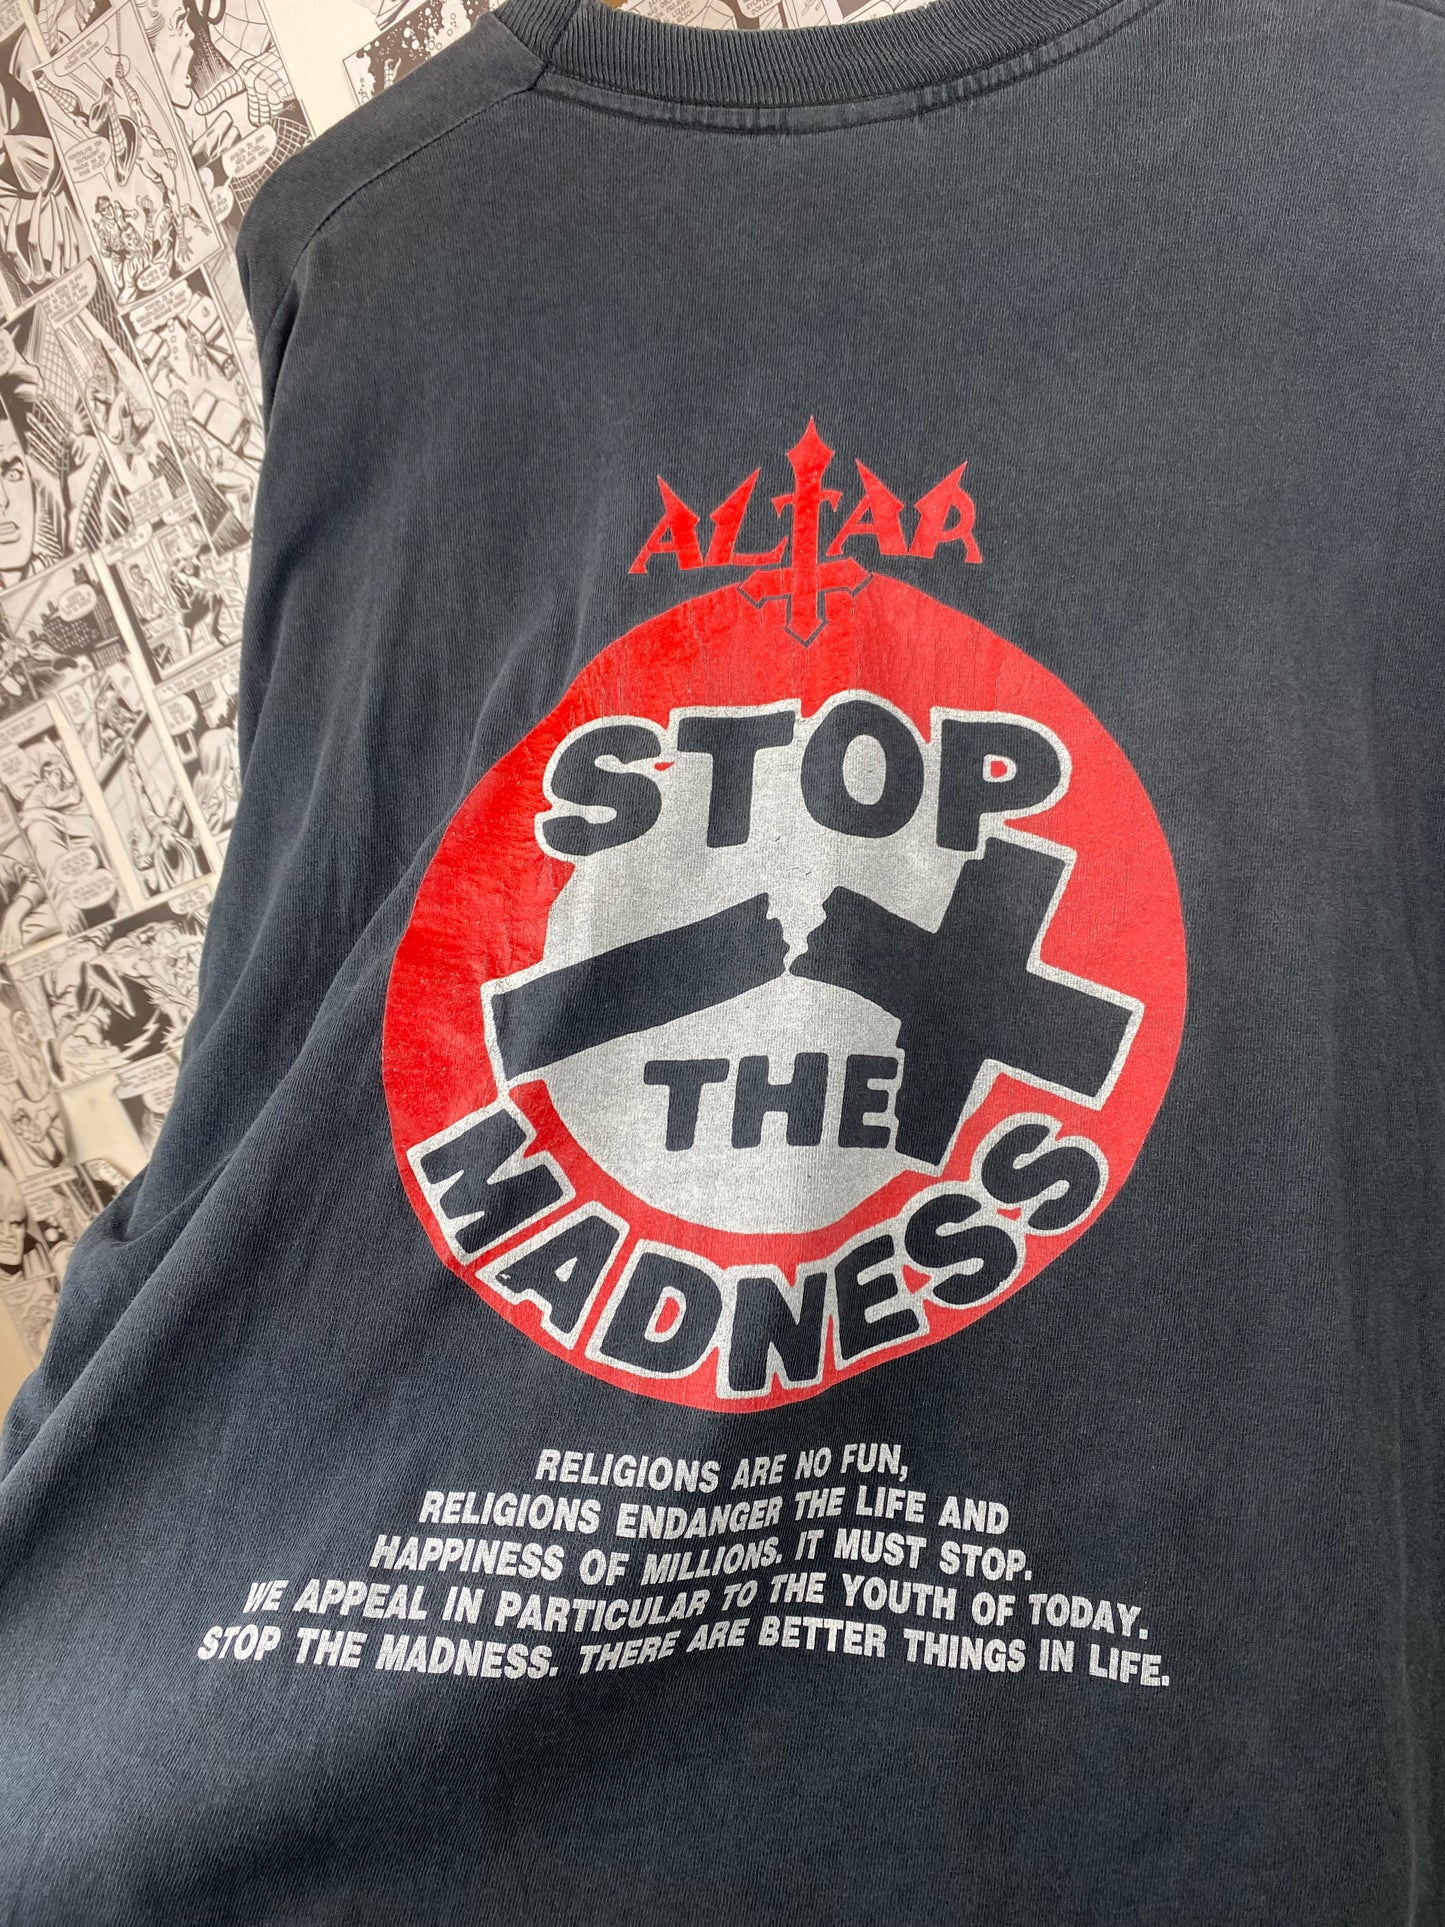 Vintage Altar “Stop the Madness” 1994 Distressed t-shirt - size XL